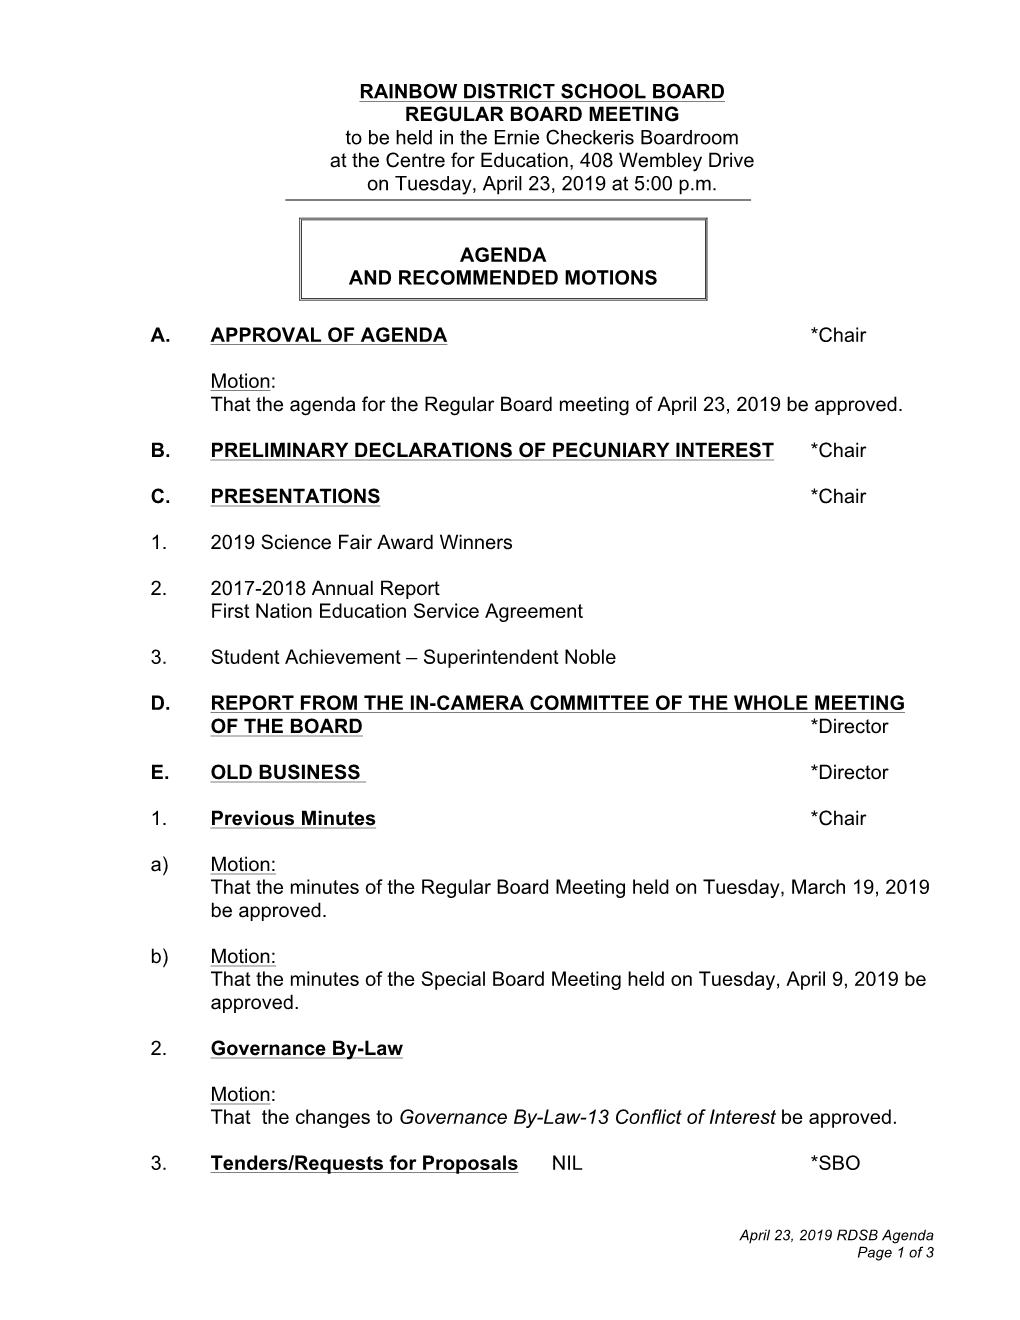 Agenda and Recommended Motions